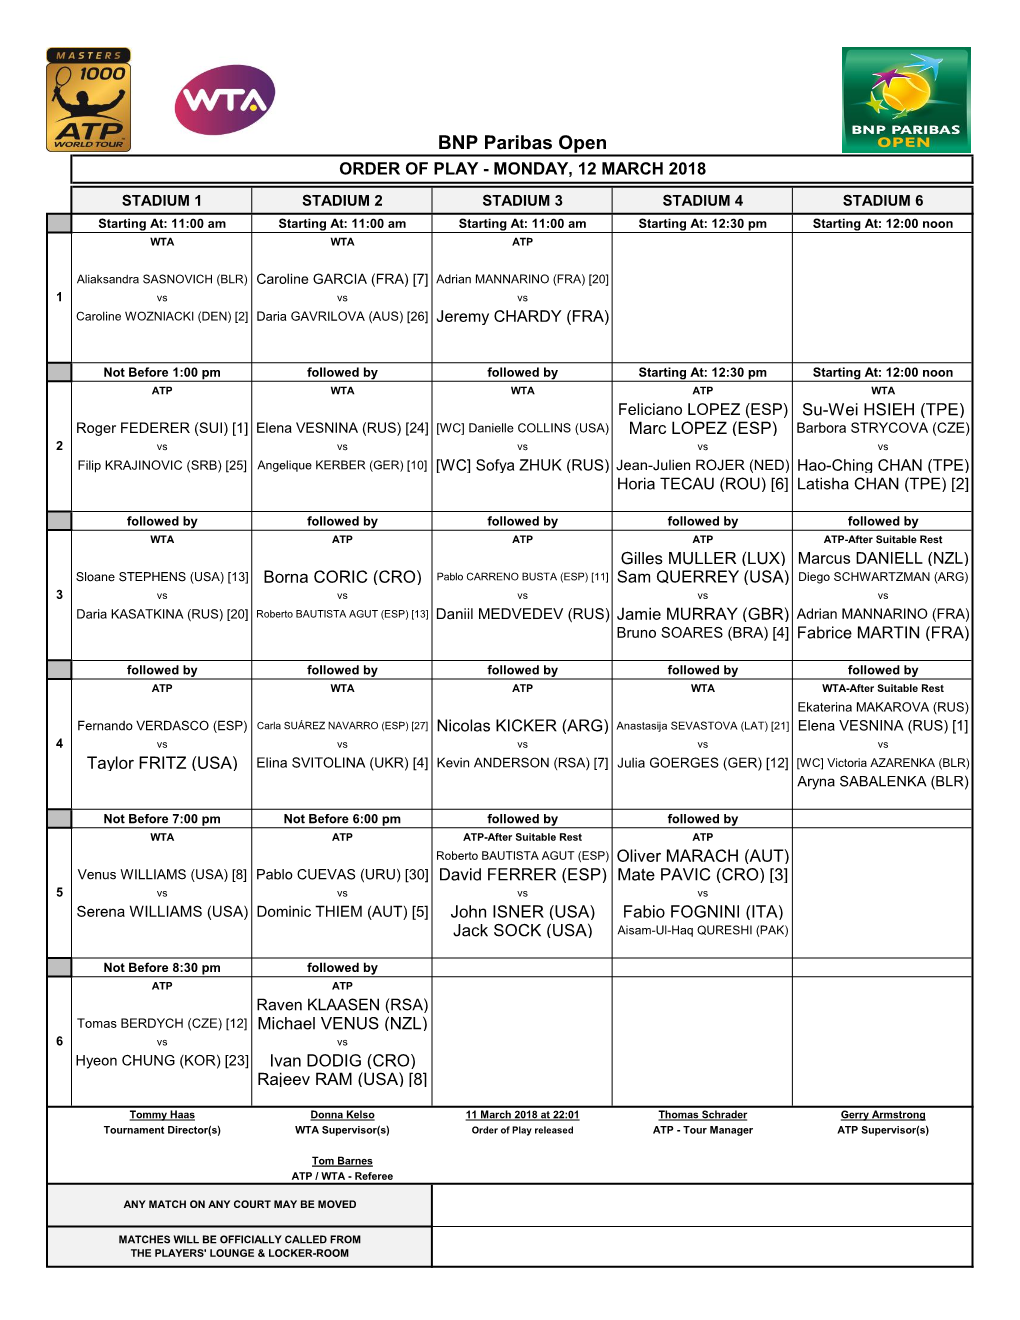 BNP Paribas Open ORDER of PLAY - MONDAY, 12 MARCH 2018